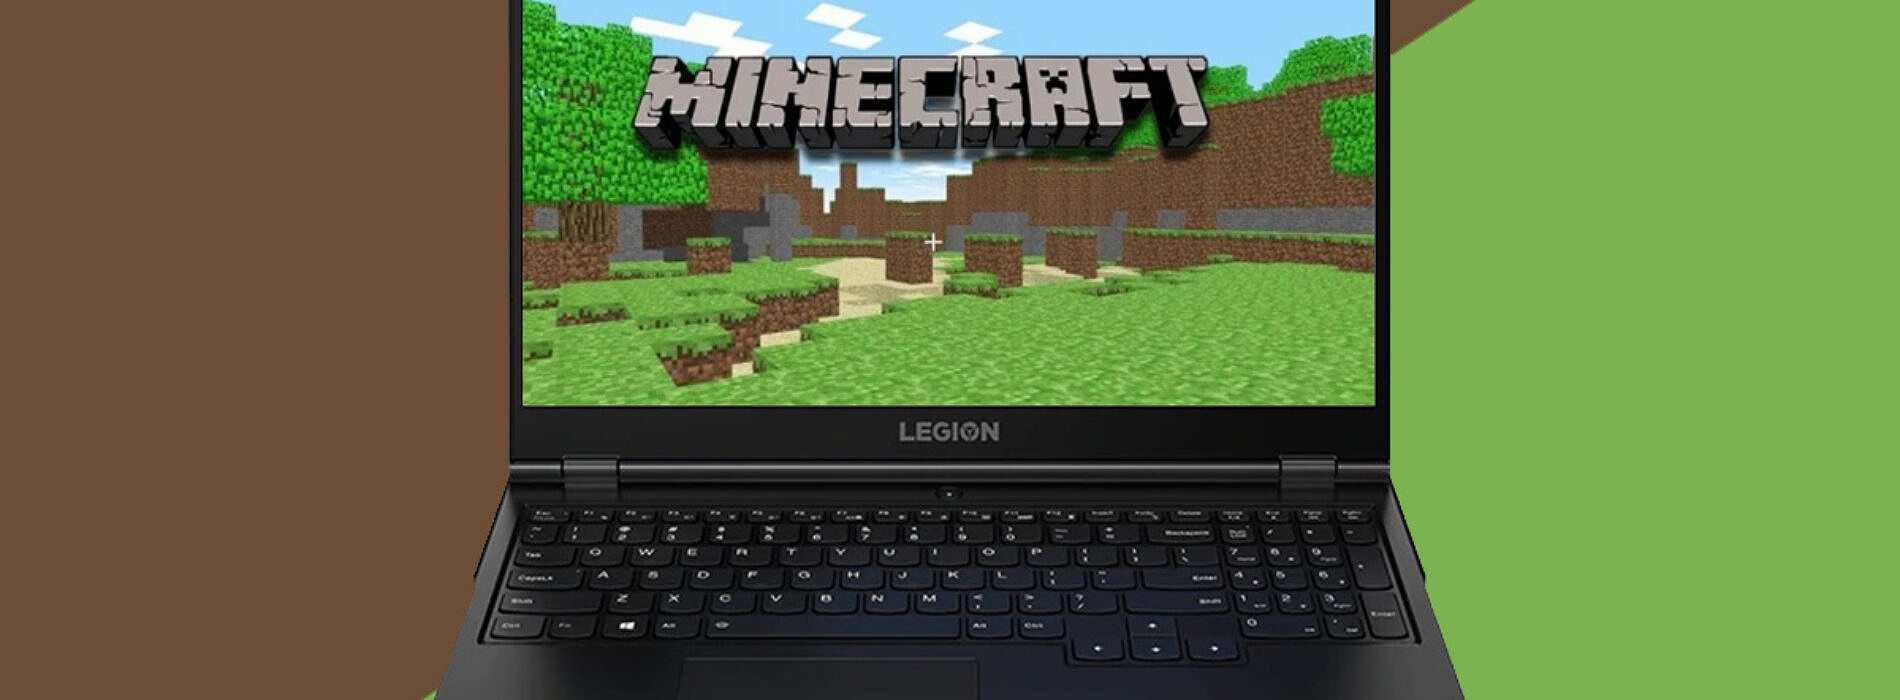 is a mac book air good for minecraft whit mods